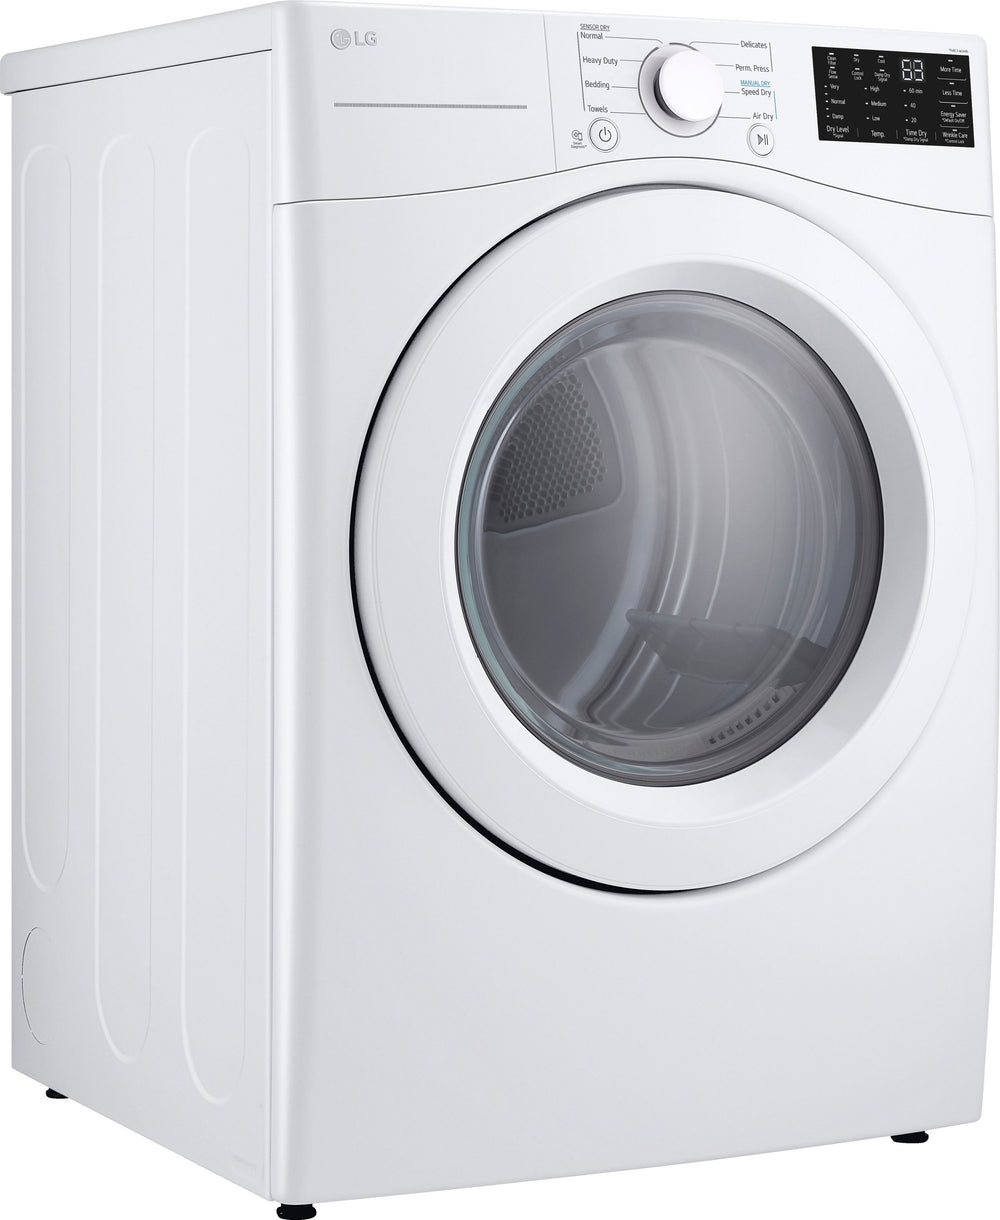 LG - 7.4 Cu. Ft. Smart Electric Dryer with Wrinkle Care - White_1